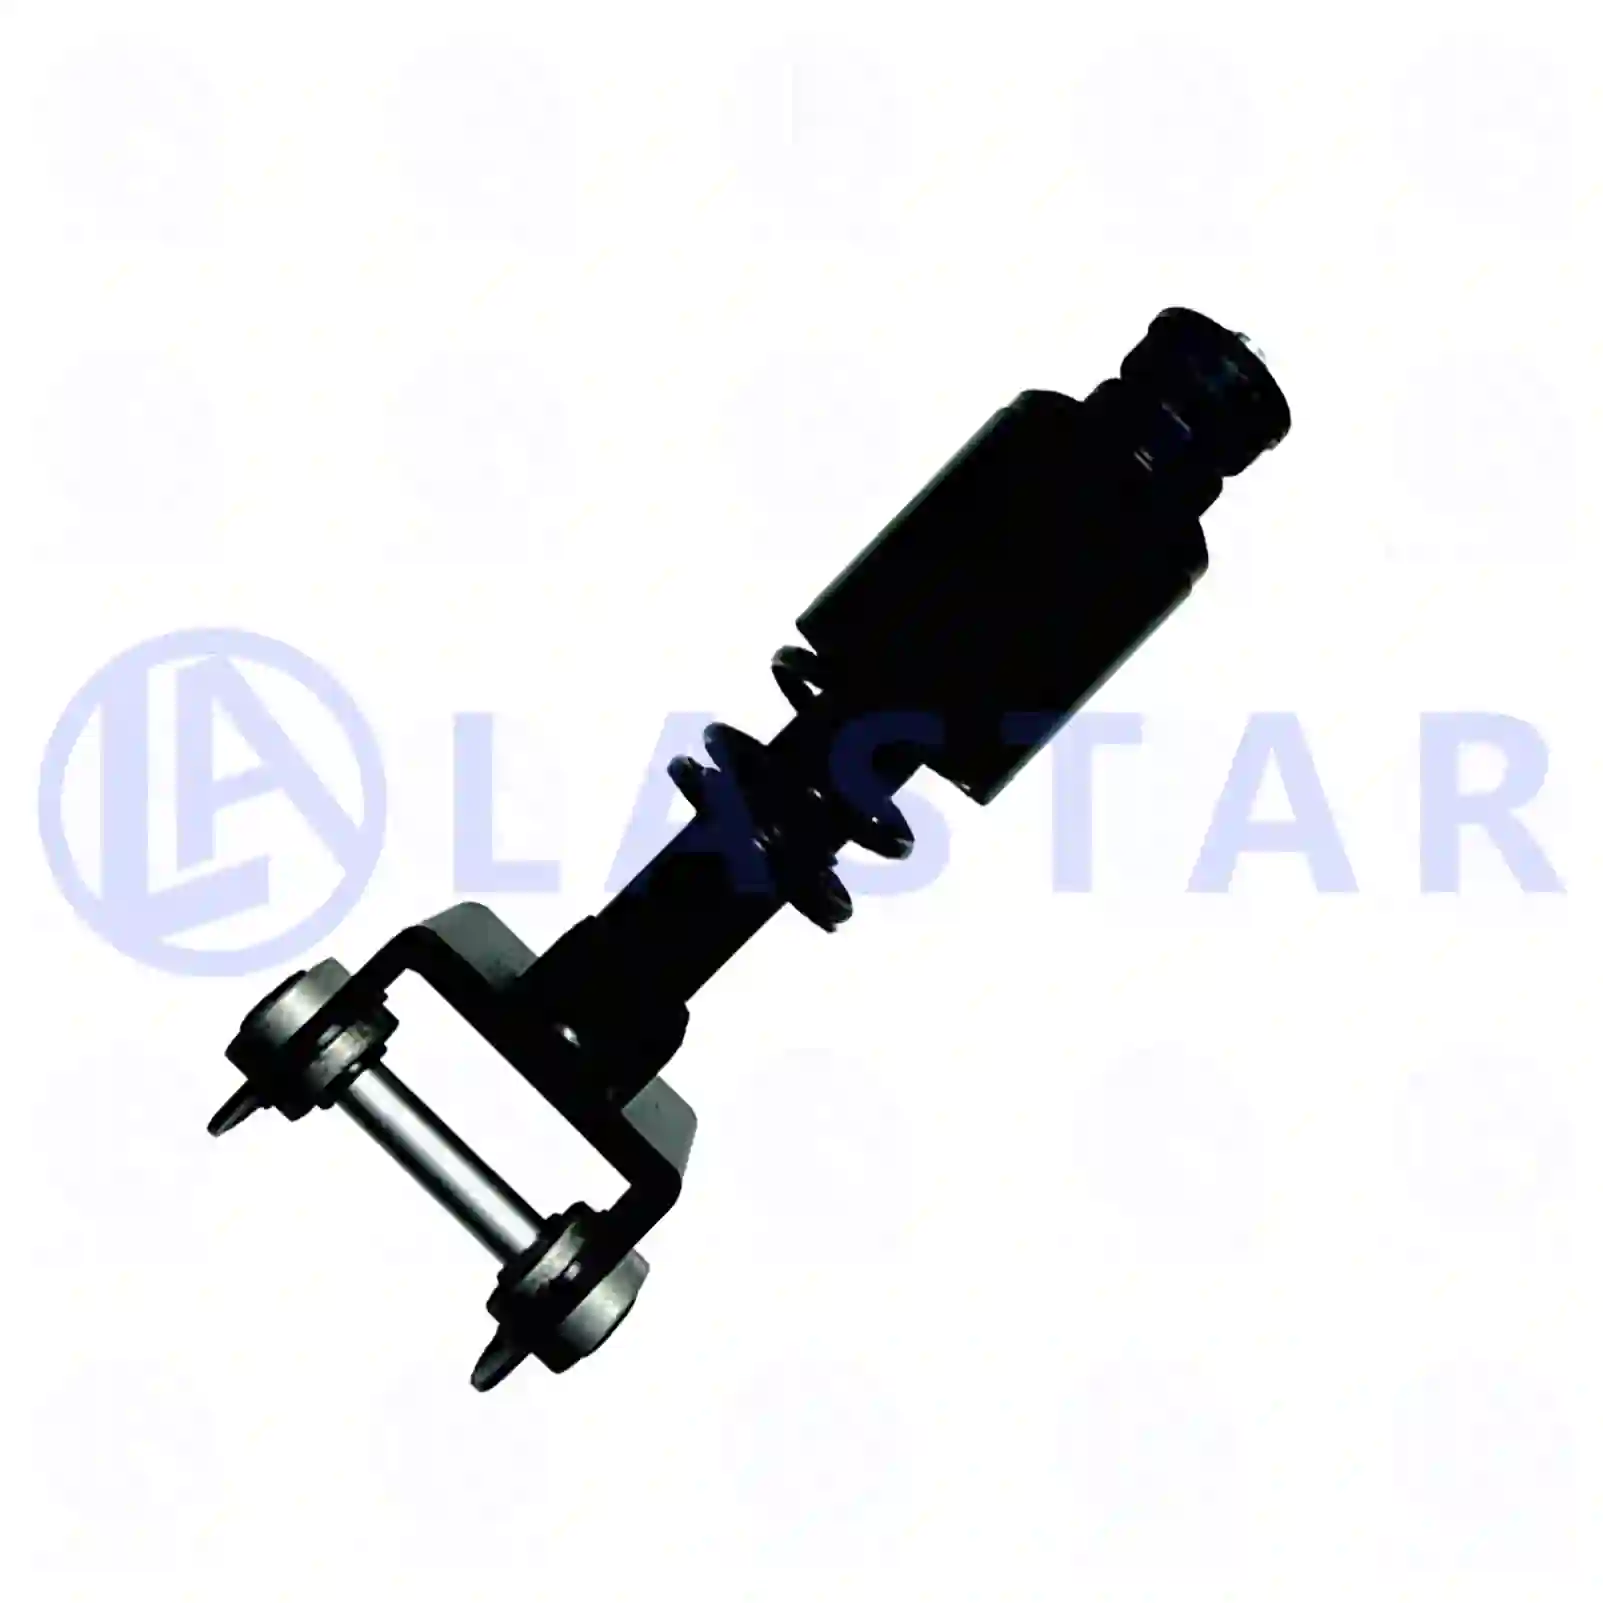  Cabin shock absorber, with spring || Lastar Spare Part | Truck Spare Parts, Auotomotive Spare Parts